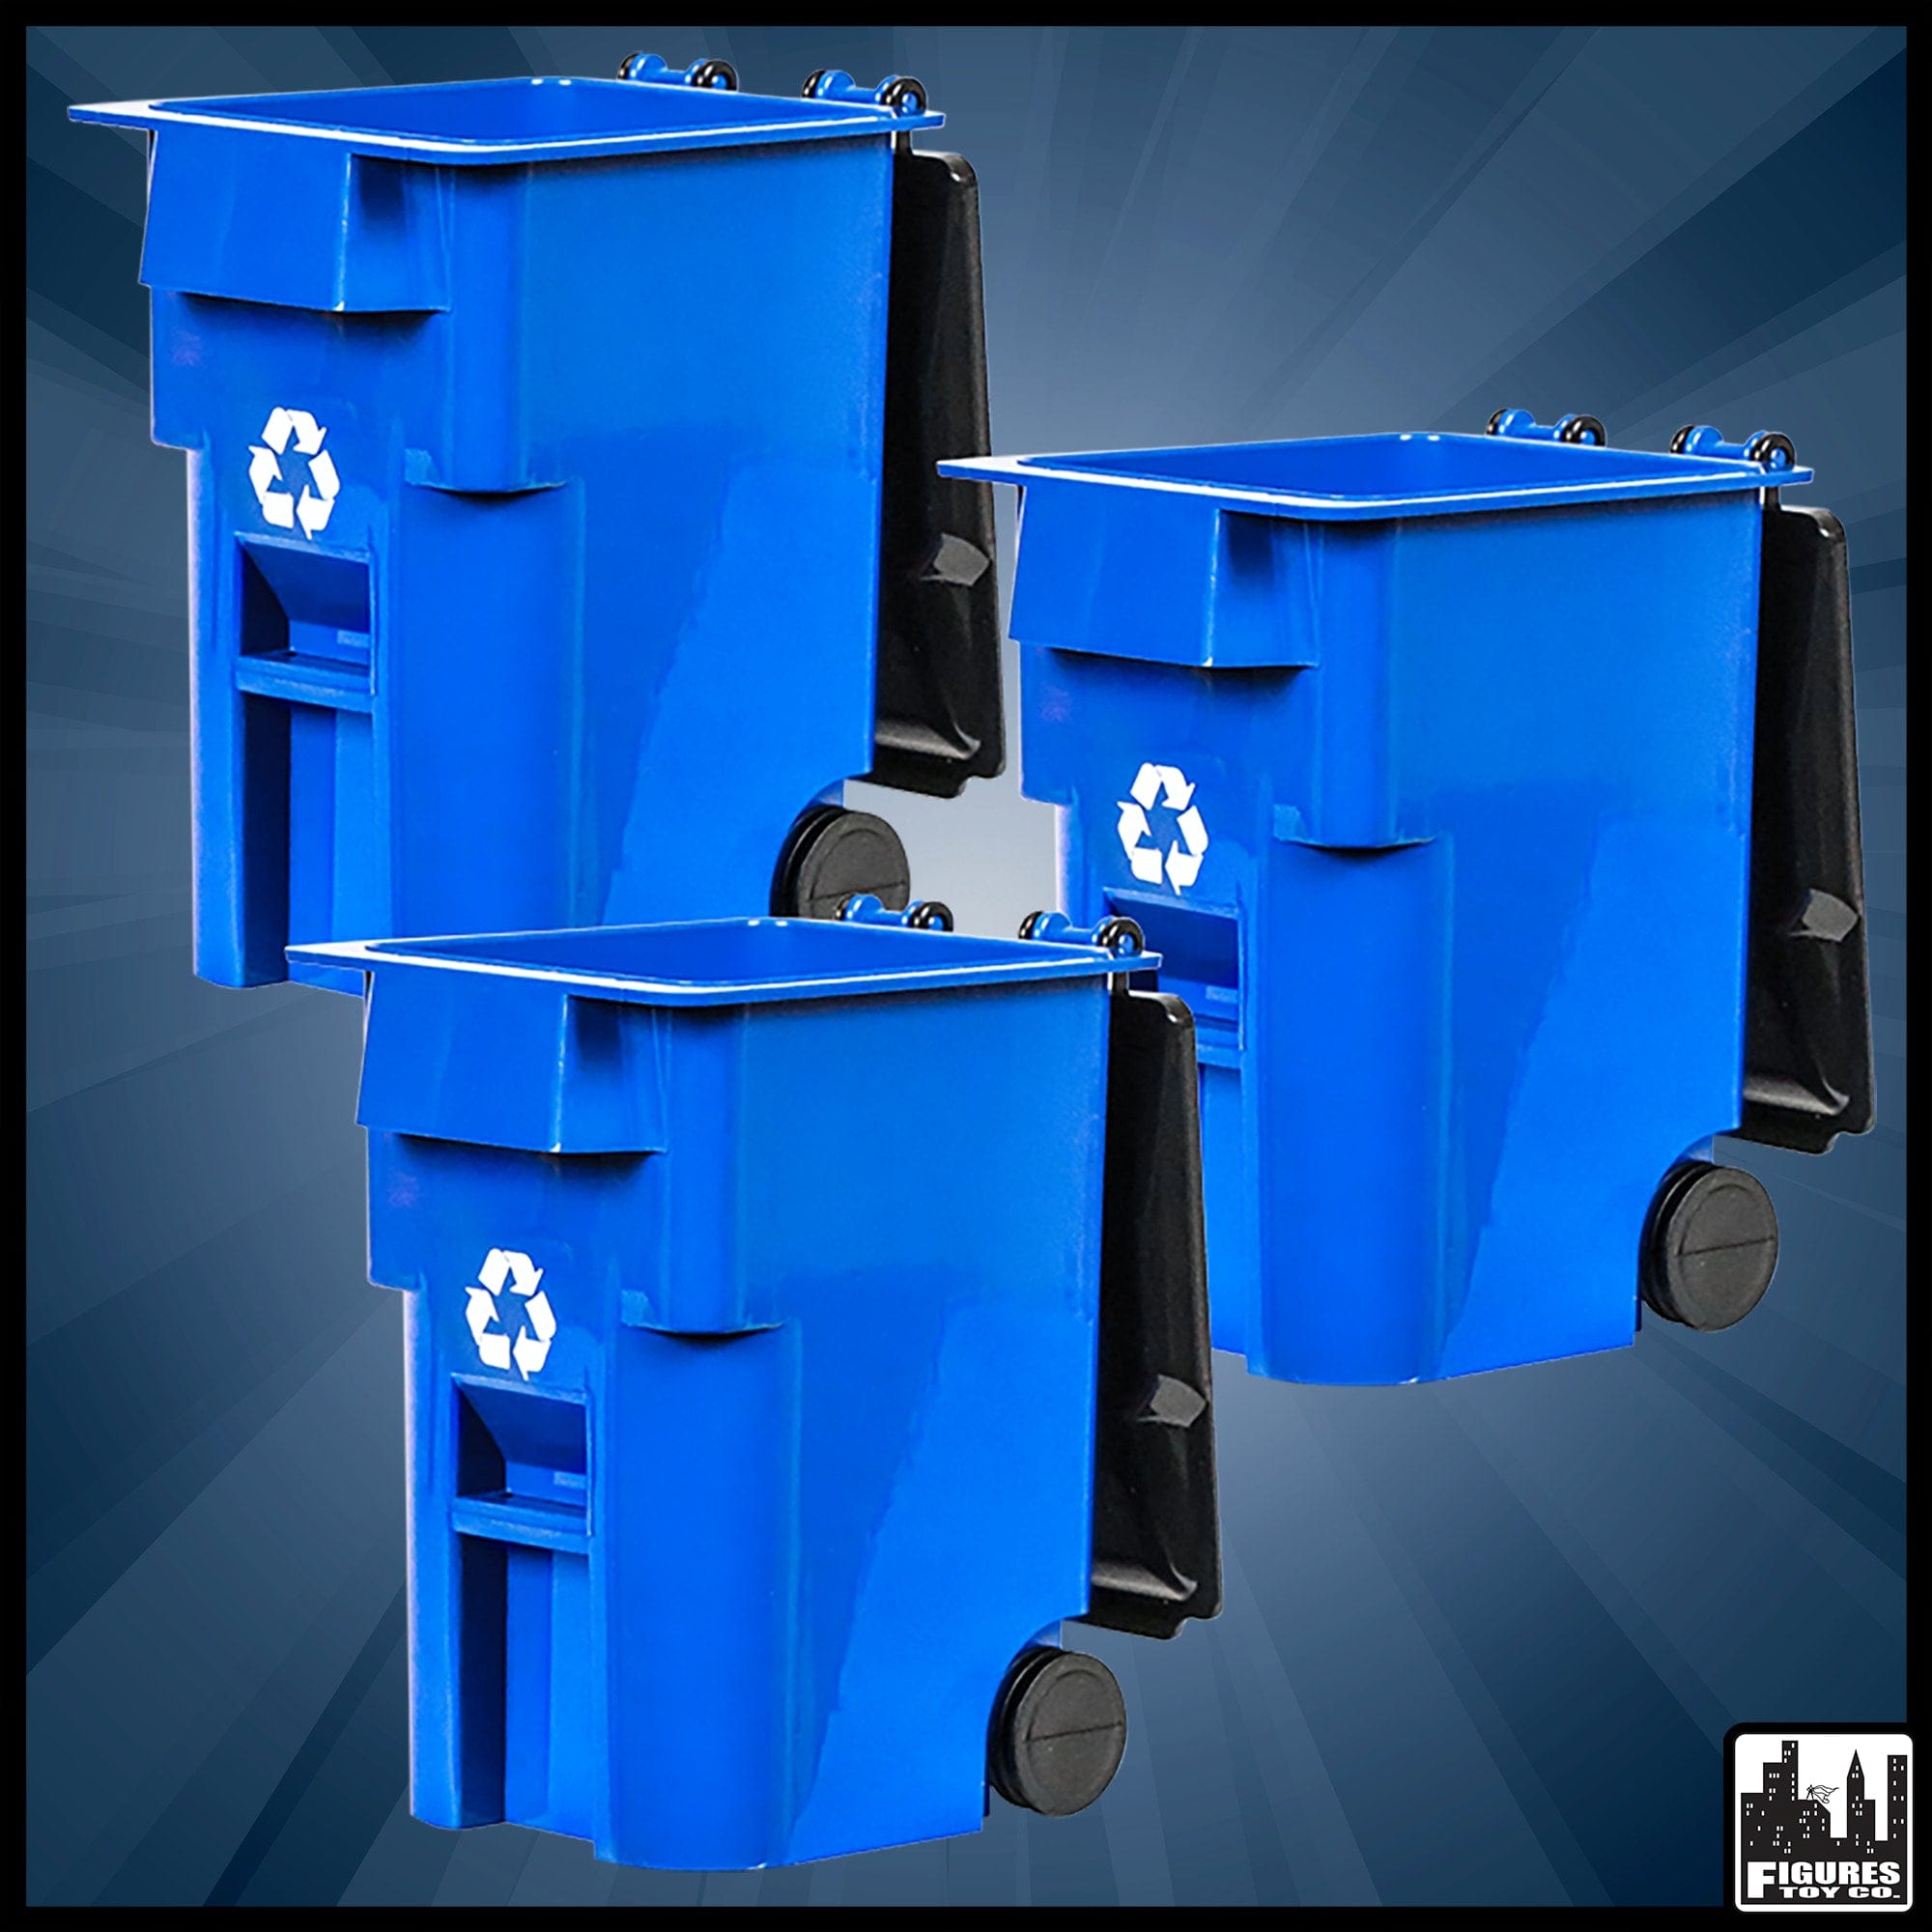 Set of 3 Blue Recycling Trash Cans With Lid & Wheels for WWE Wrestling Action Figures